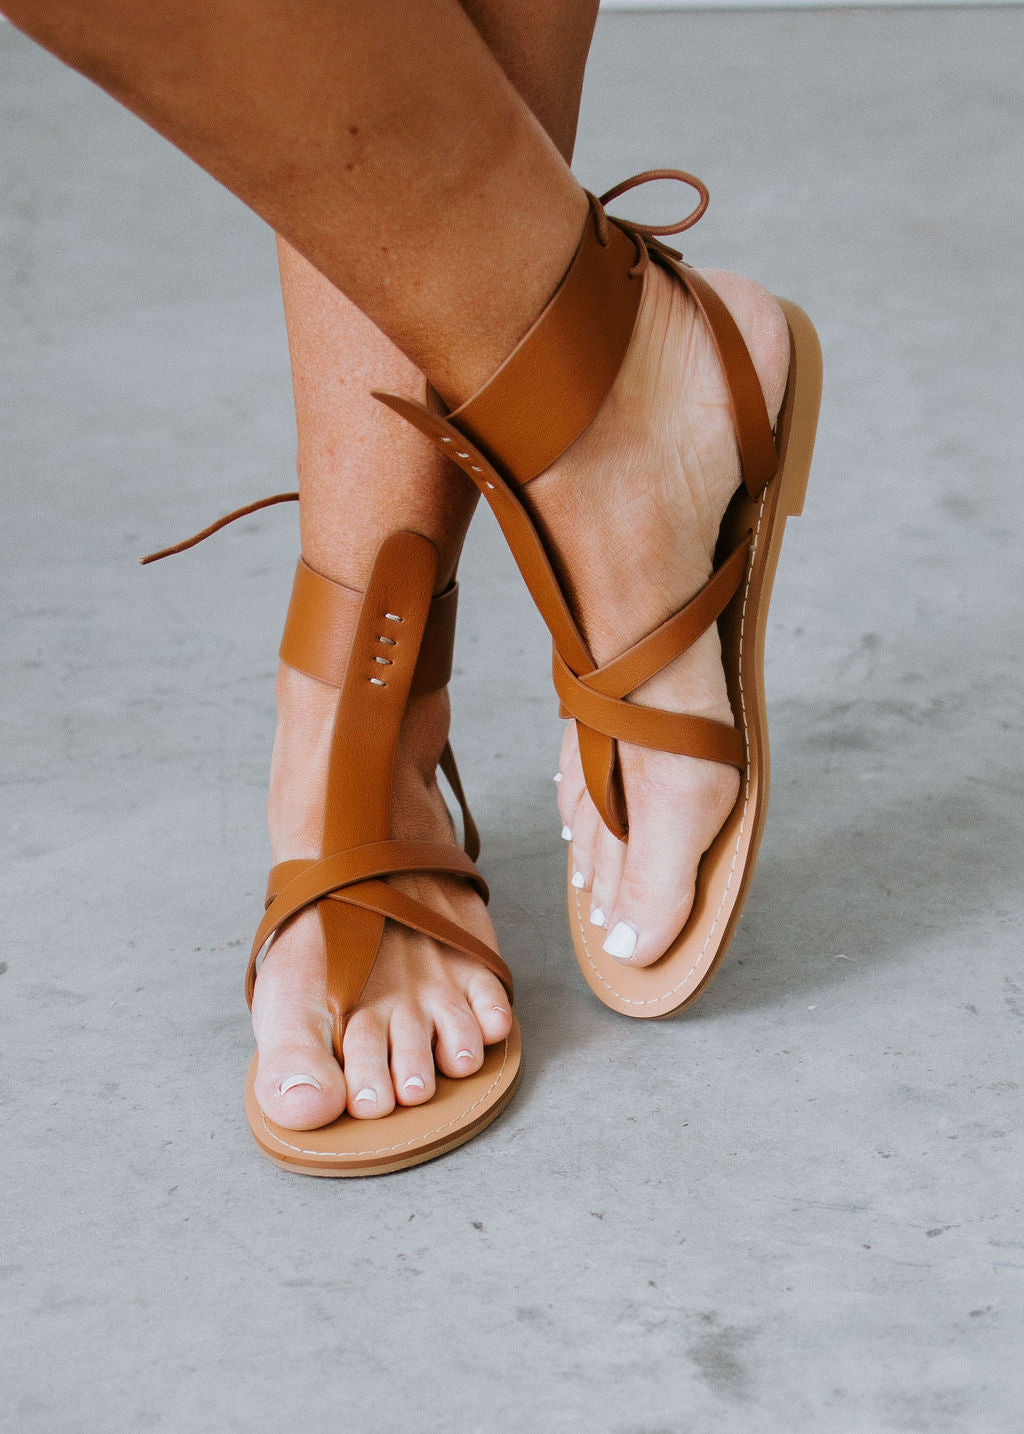 image of Kayden Lace Up Sandals